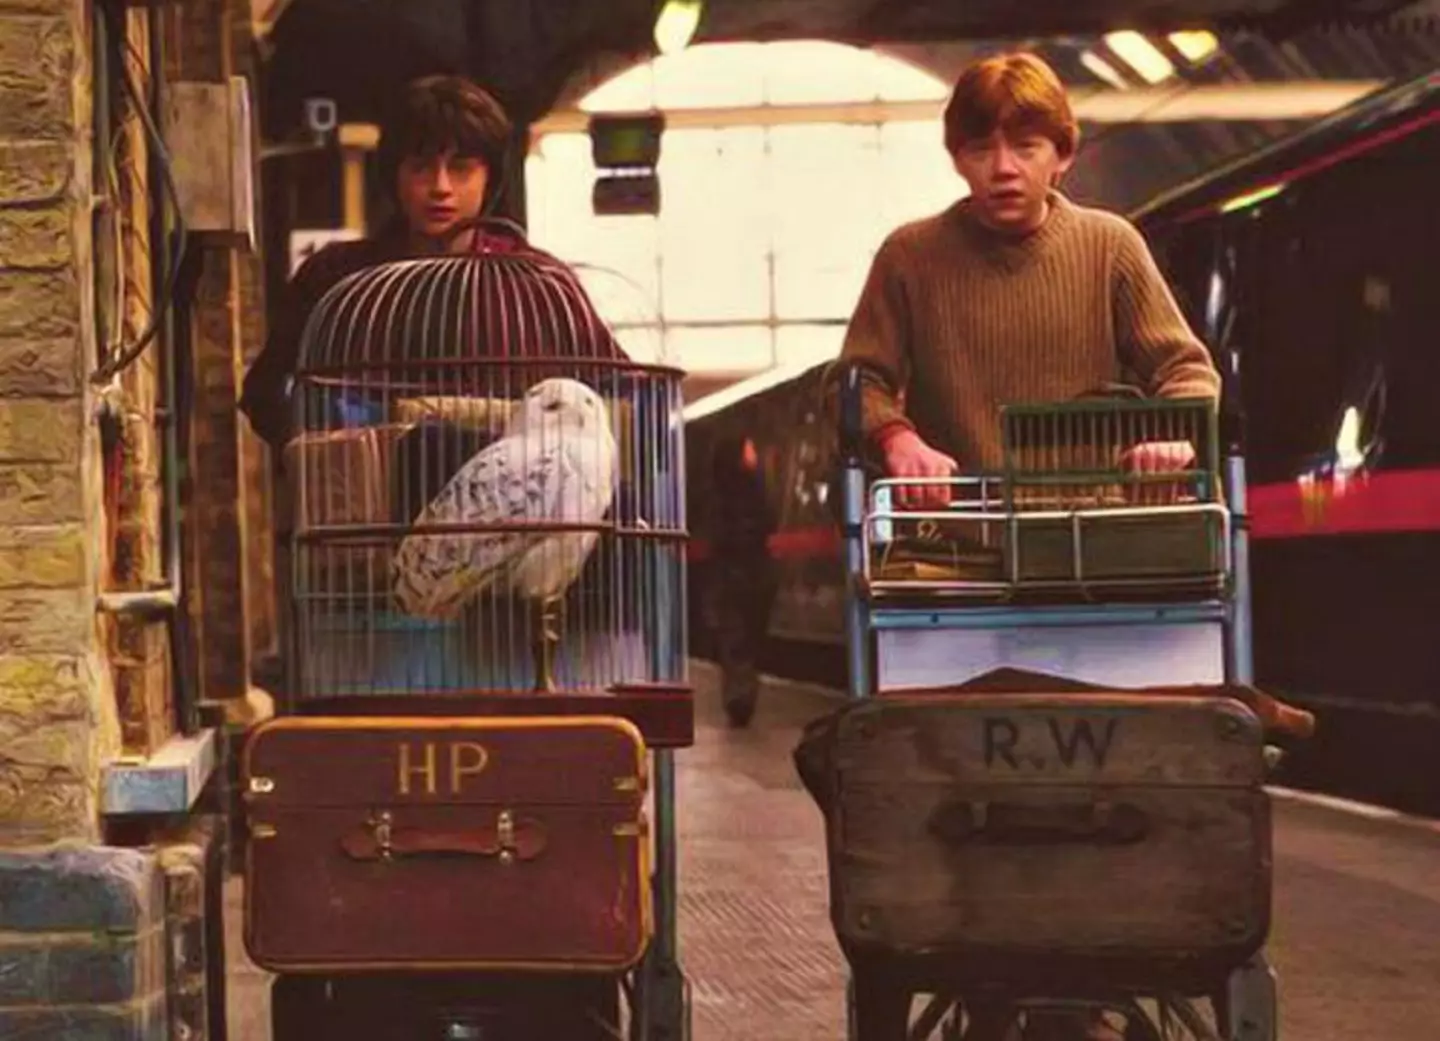 Daniel Radcliffe and Rupert Grint in Harry Potter and The Philosopher's Stone. (Warner Bros)